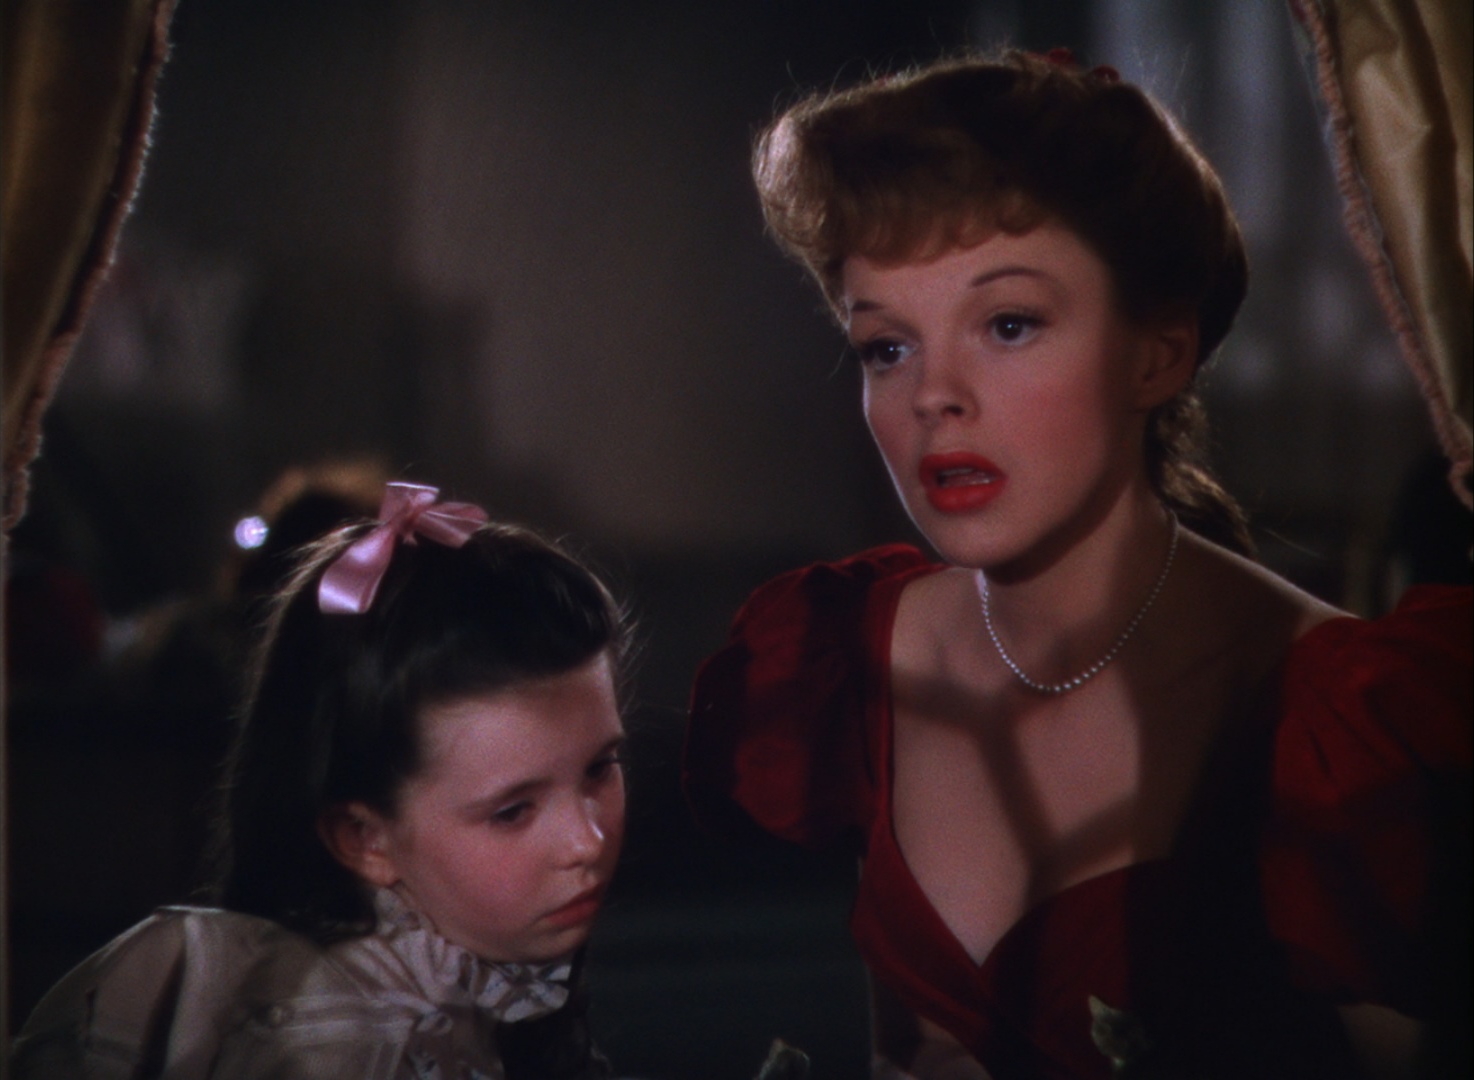 Still from "Meet Me In St. Louis" featuring Judy Garland, singing Have Yourself a Merry Little Christmas